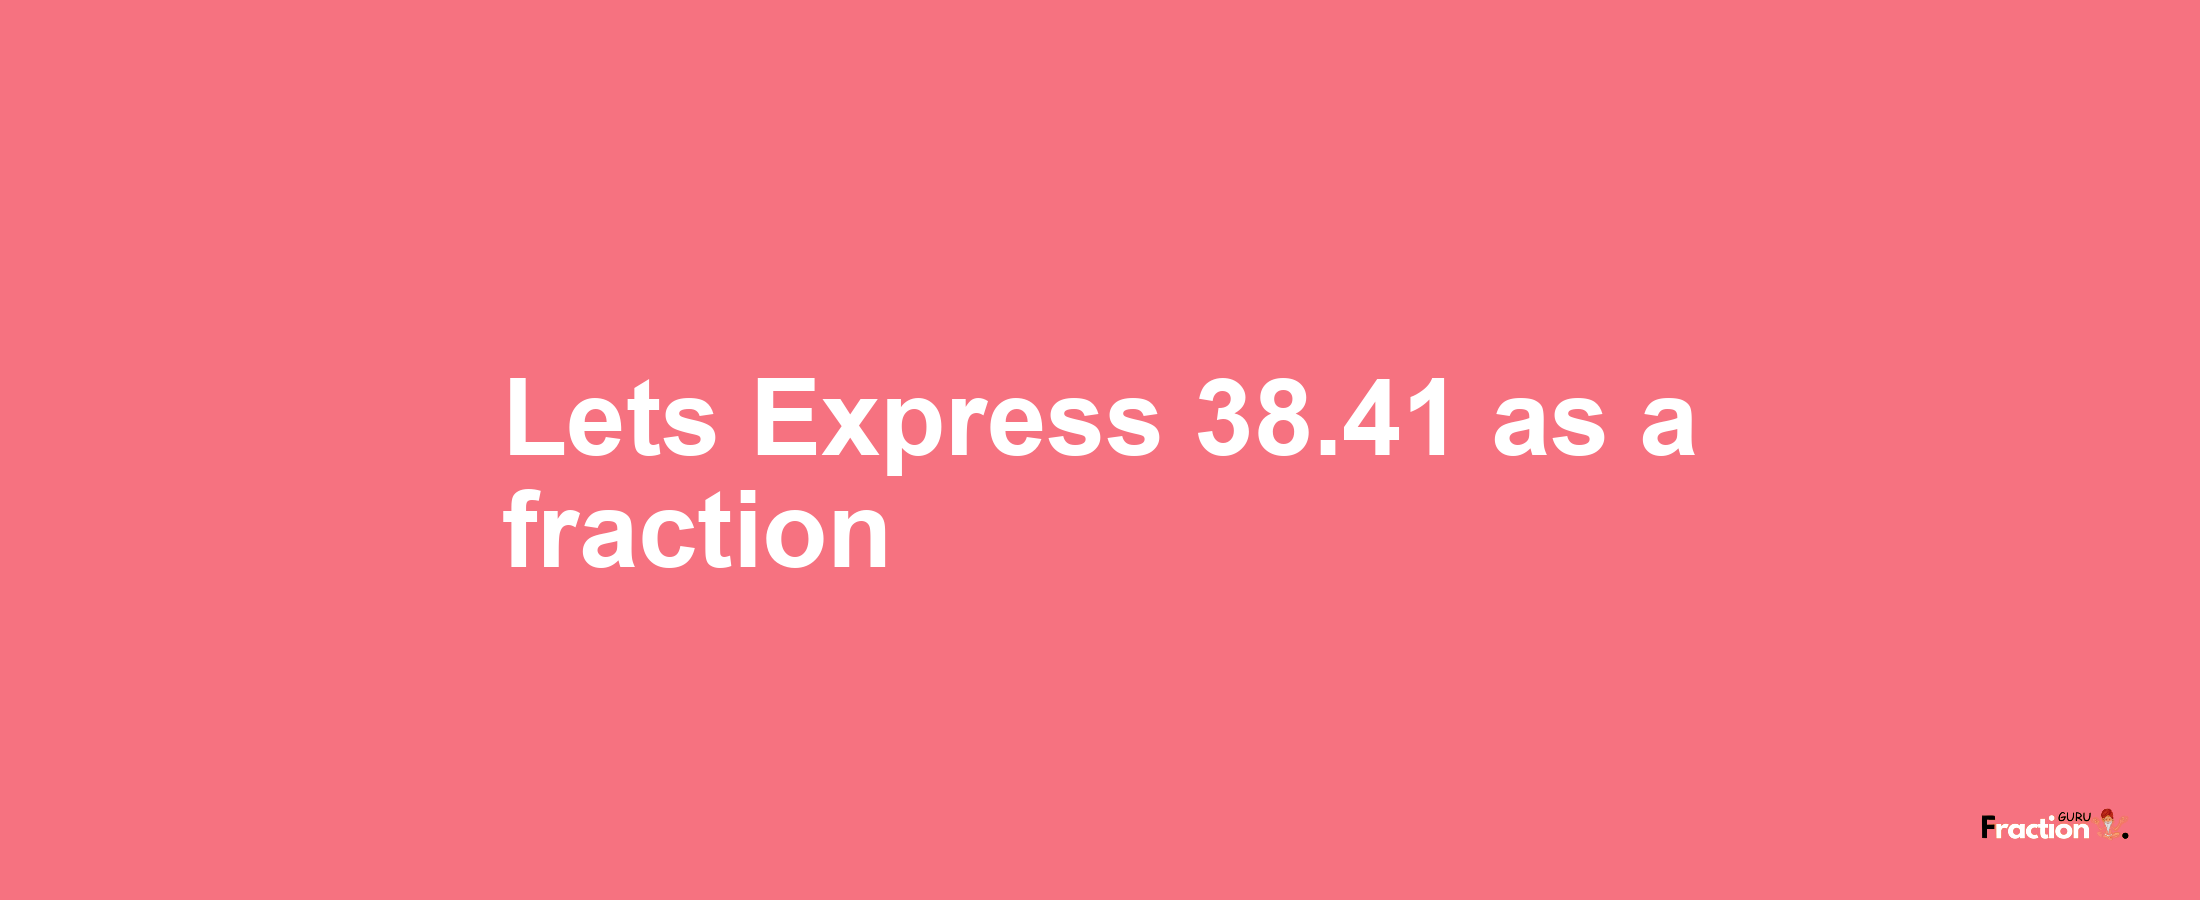 Lets Express 38.41 as afraction